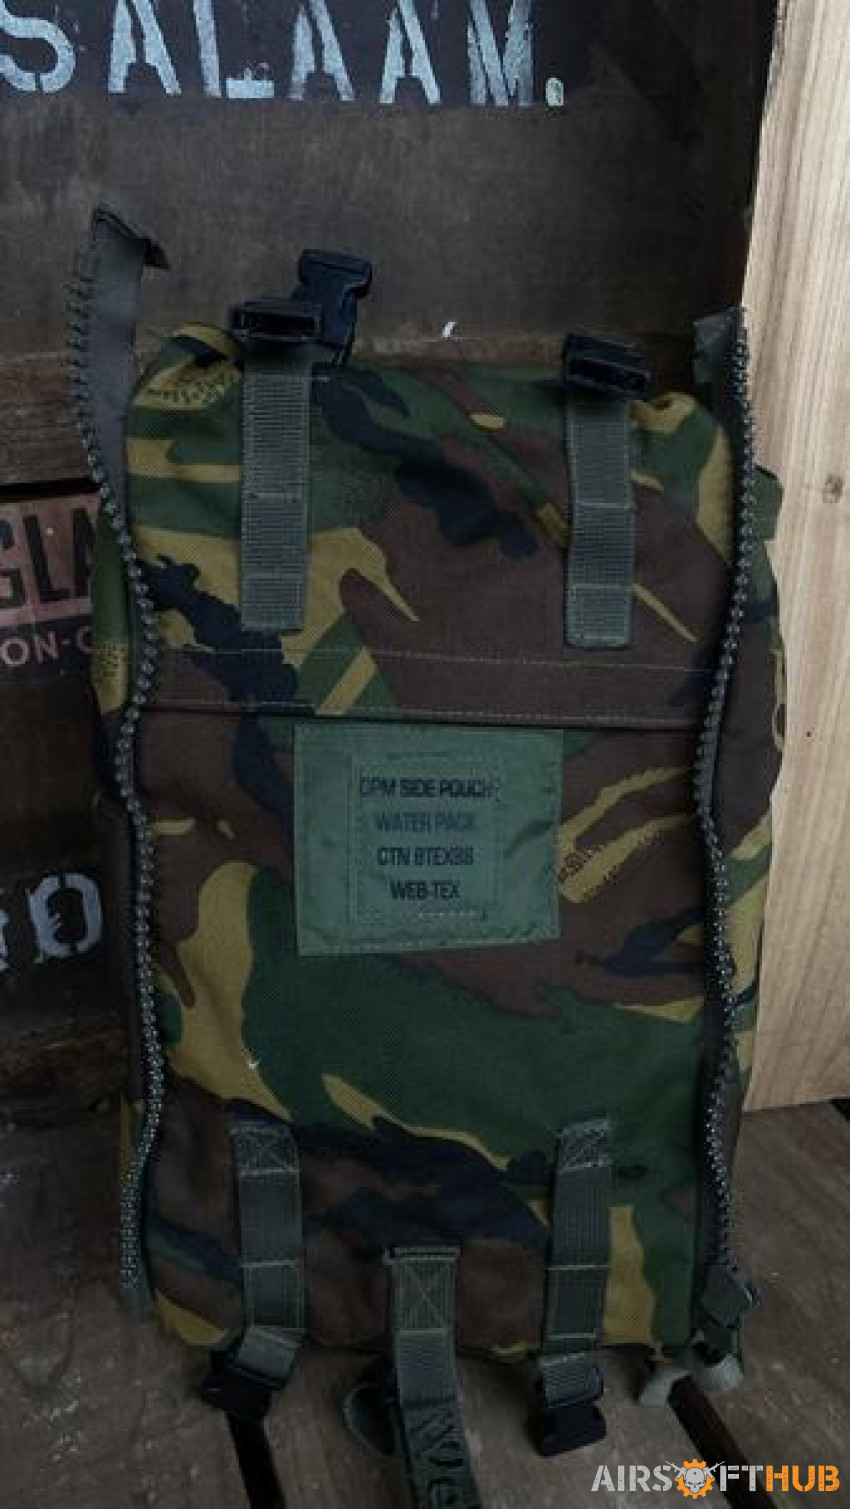 web-tex DPM side pouch water - Used airsoft equipment